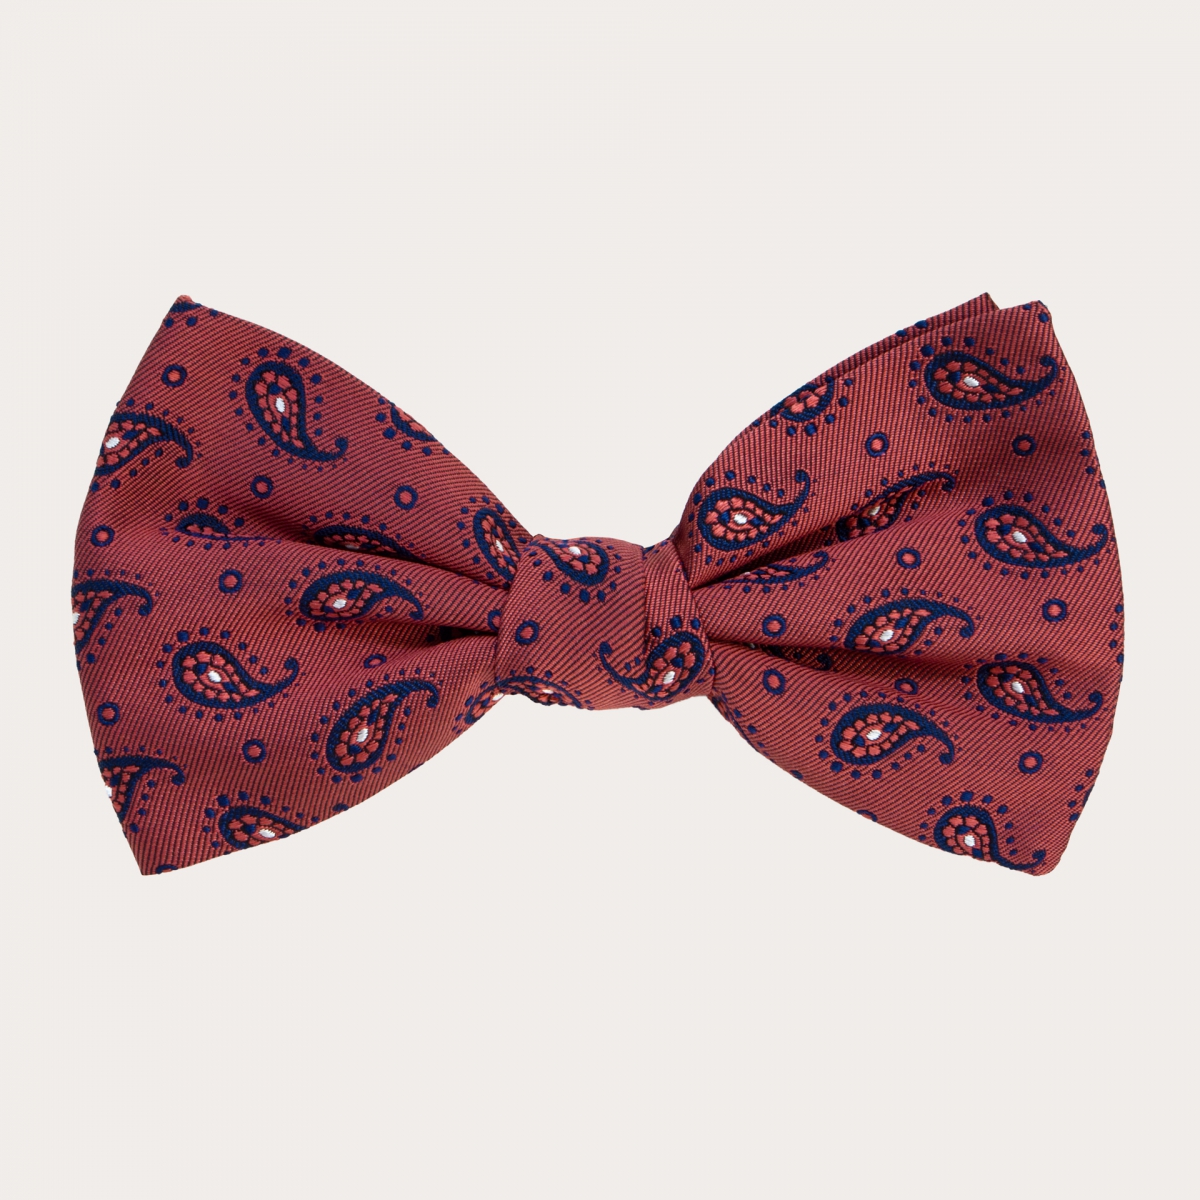 BRUCLE Refined set of red paisley silk suspenders and matching bow tie